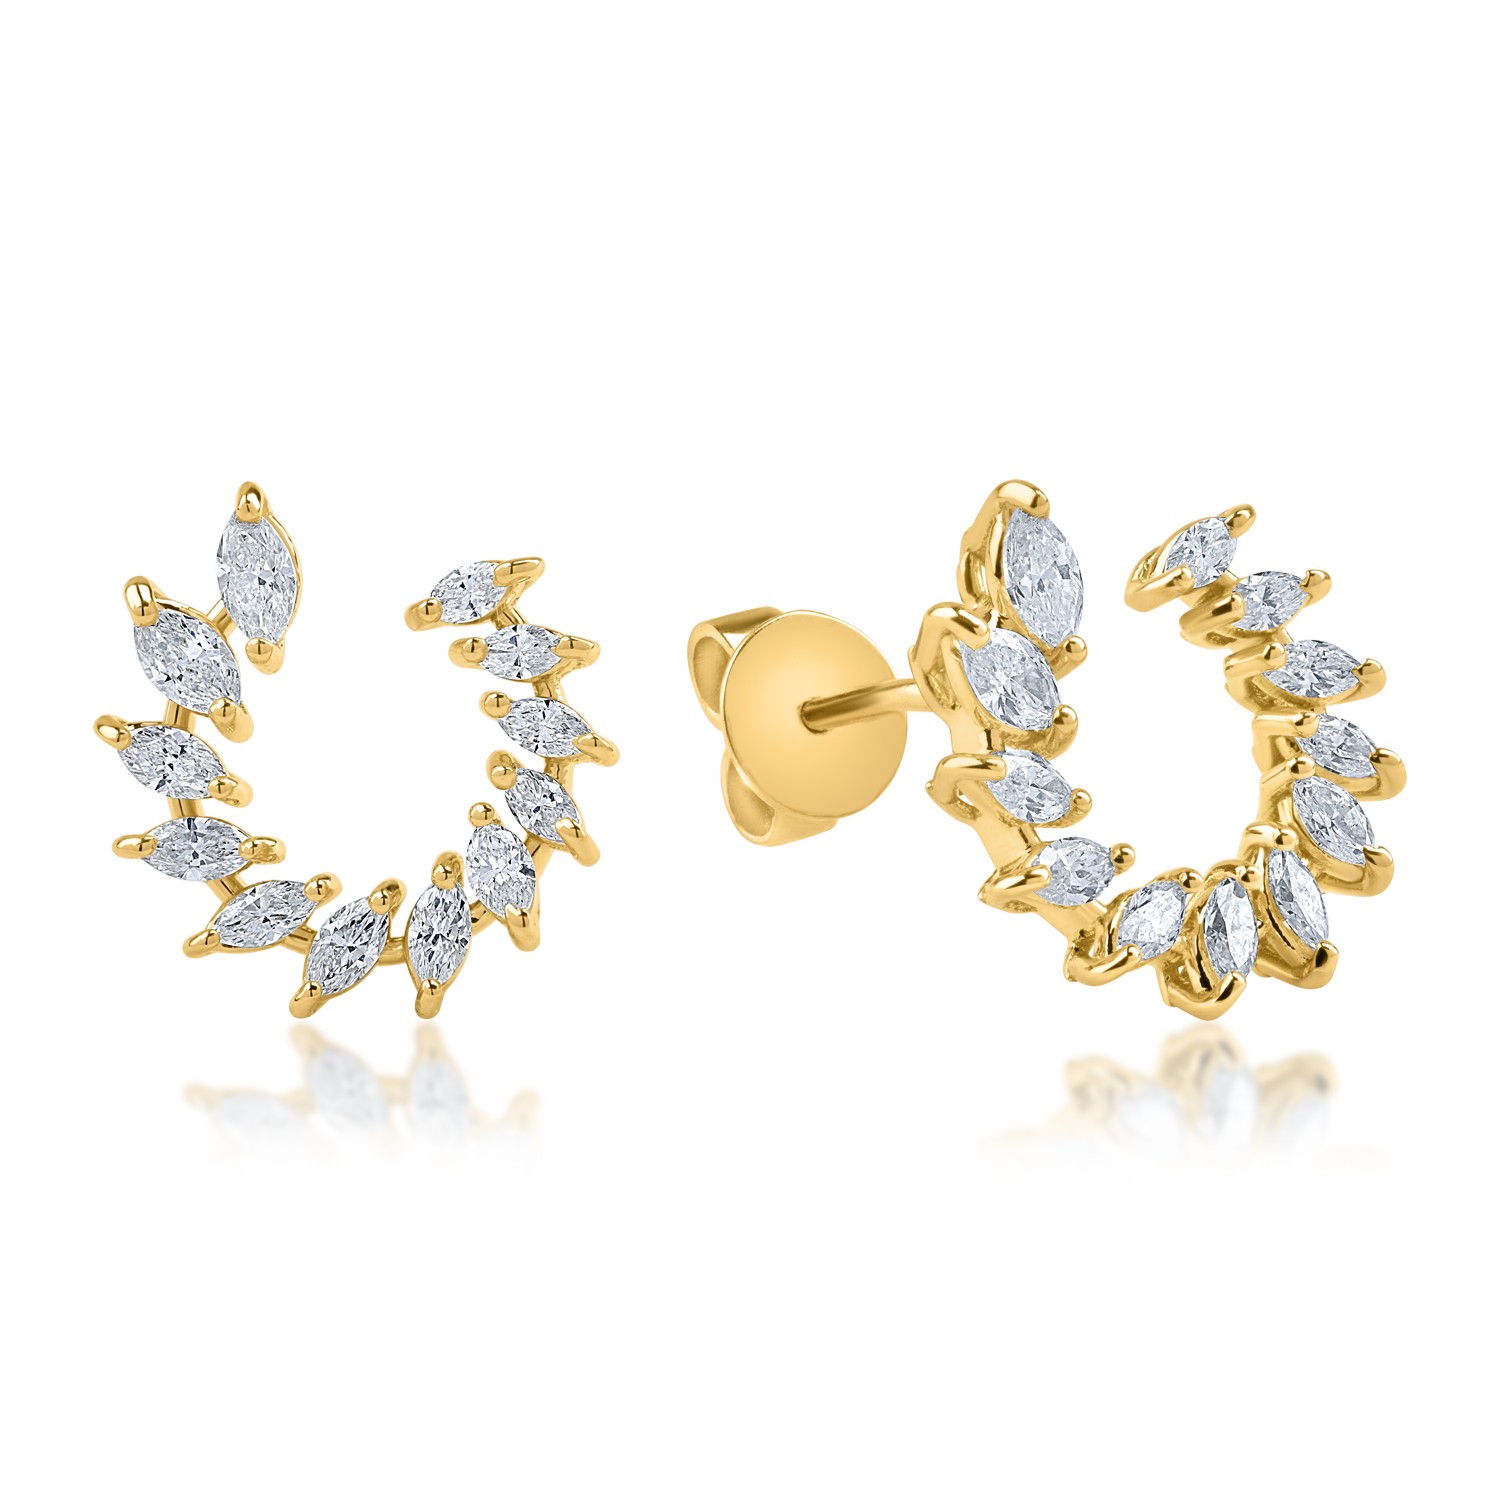 Yellow gold earrings with 1.17ct diamonds